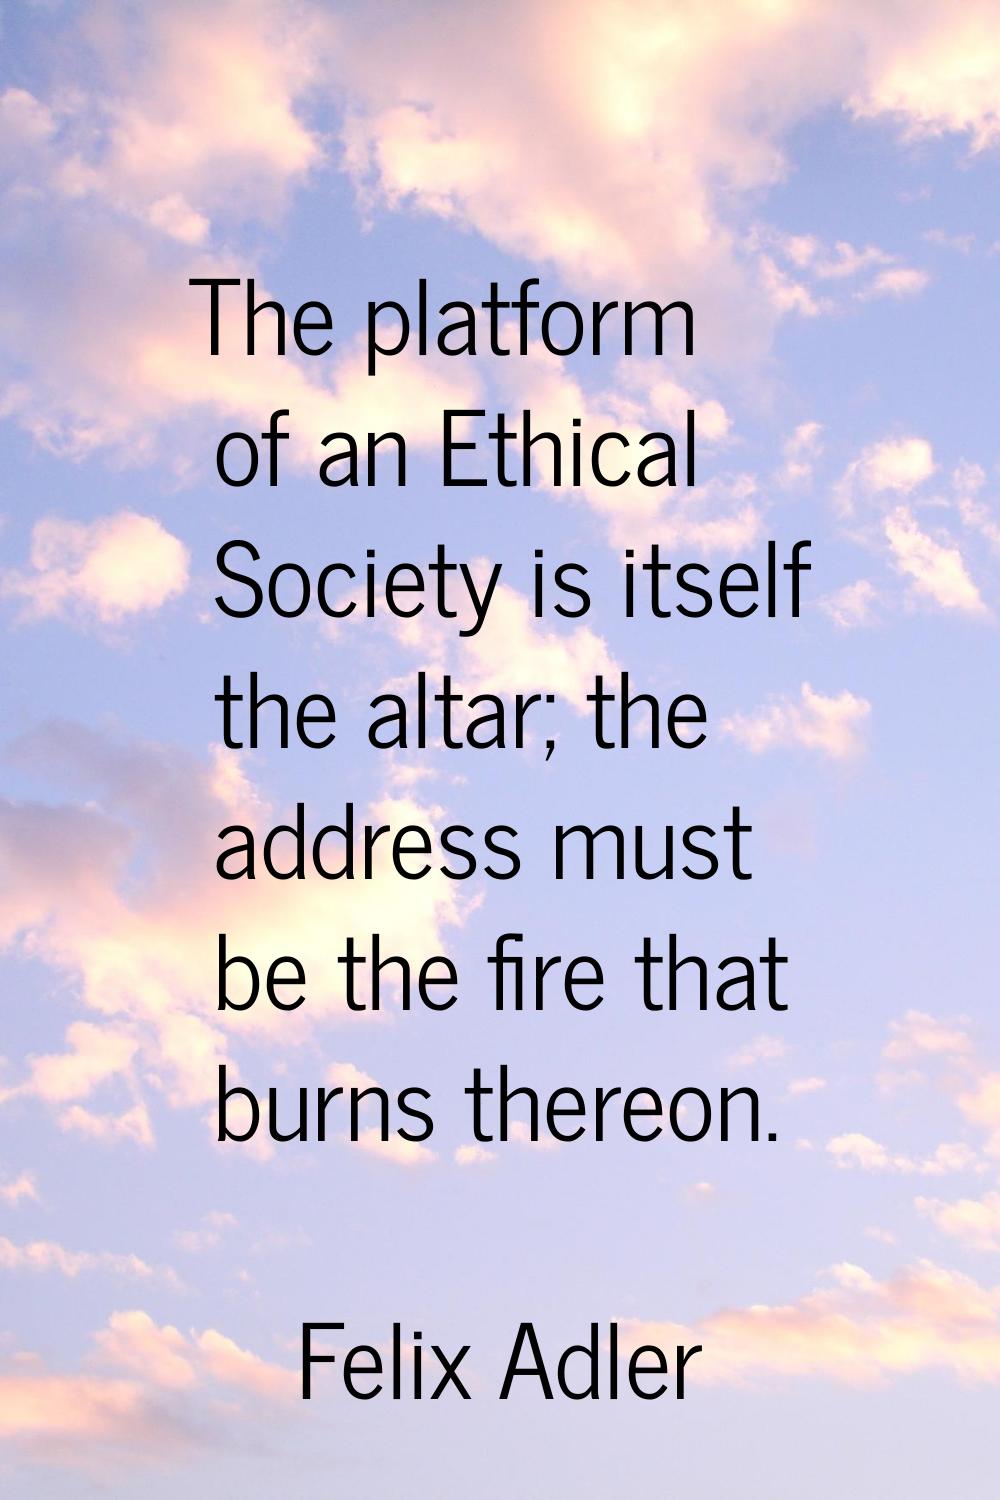 The platform of an Ethical Society is itself the altar; the address must be the fire that burns the